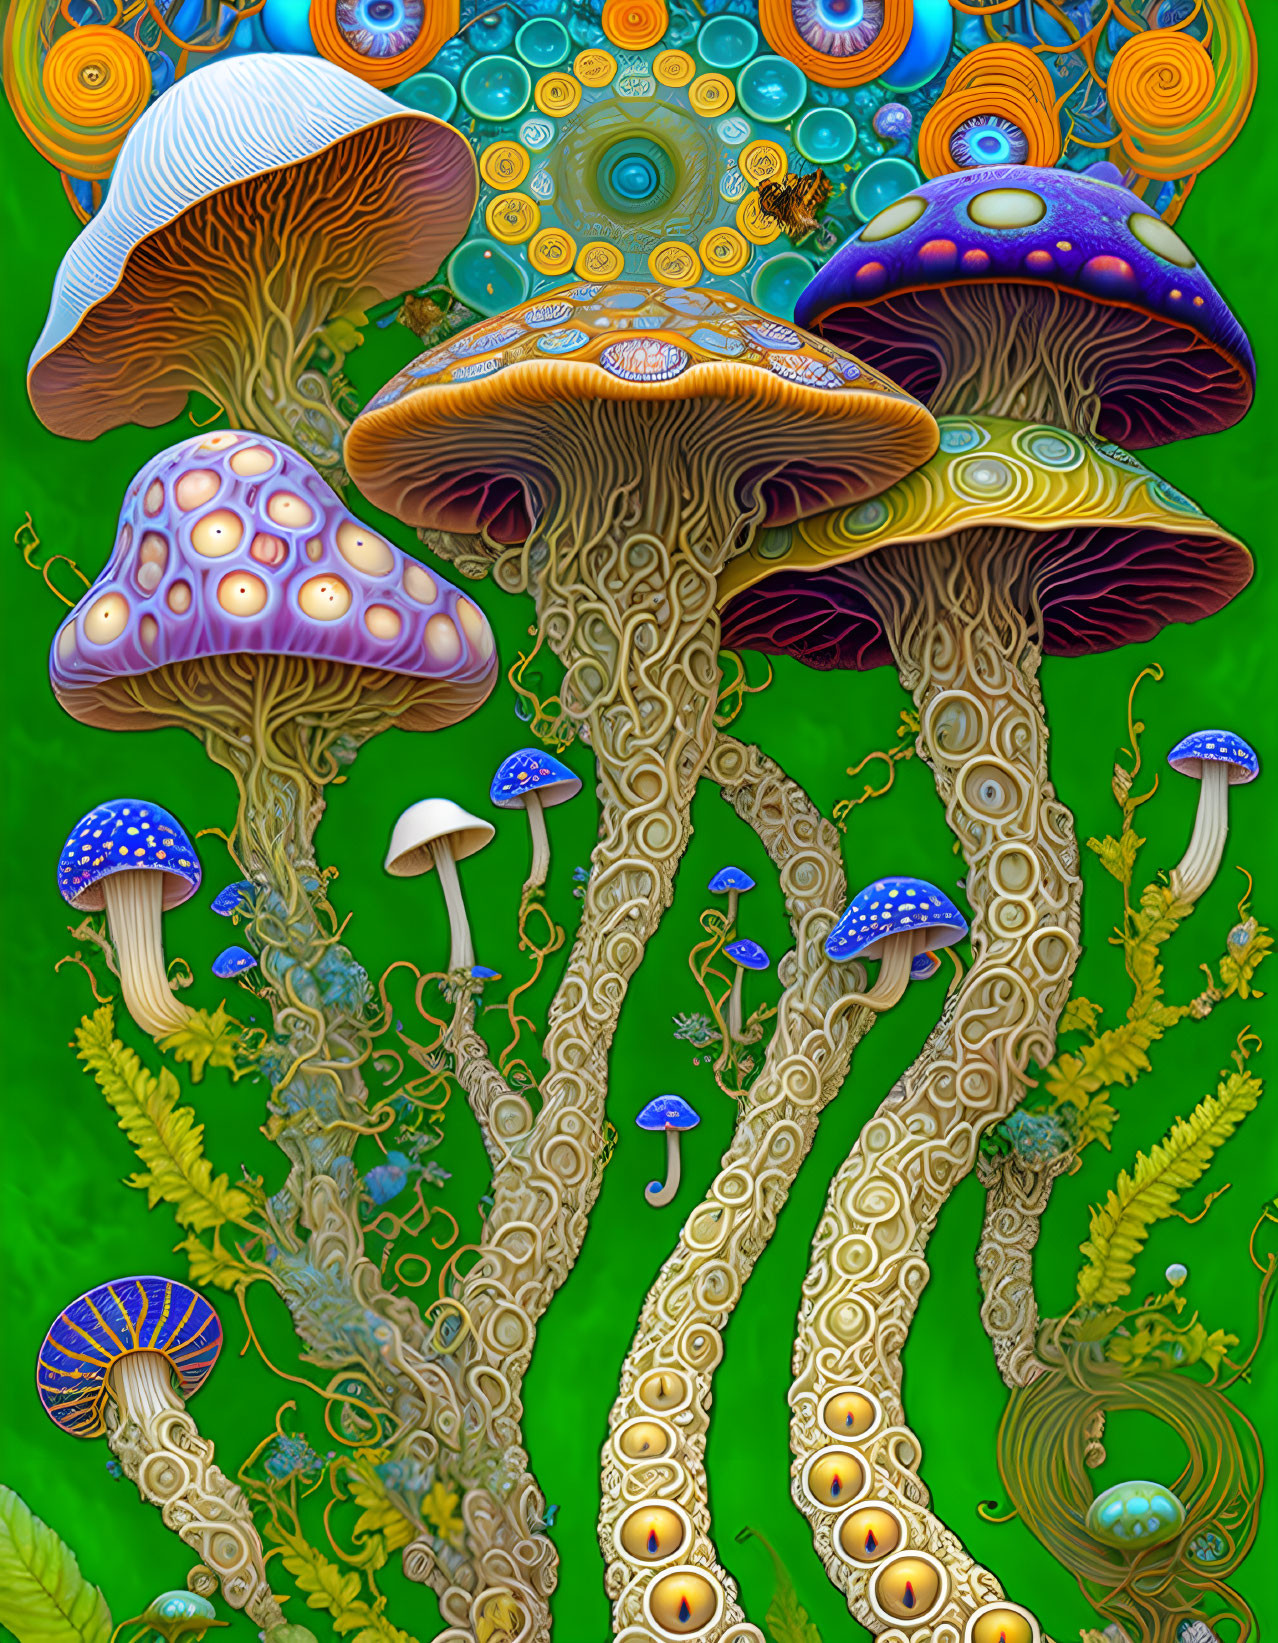 Colorful Illustration of Whimsical Mushrooms in Nature